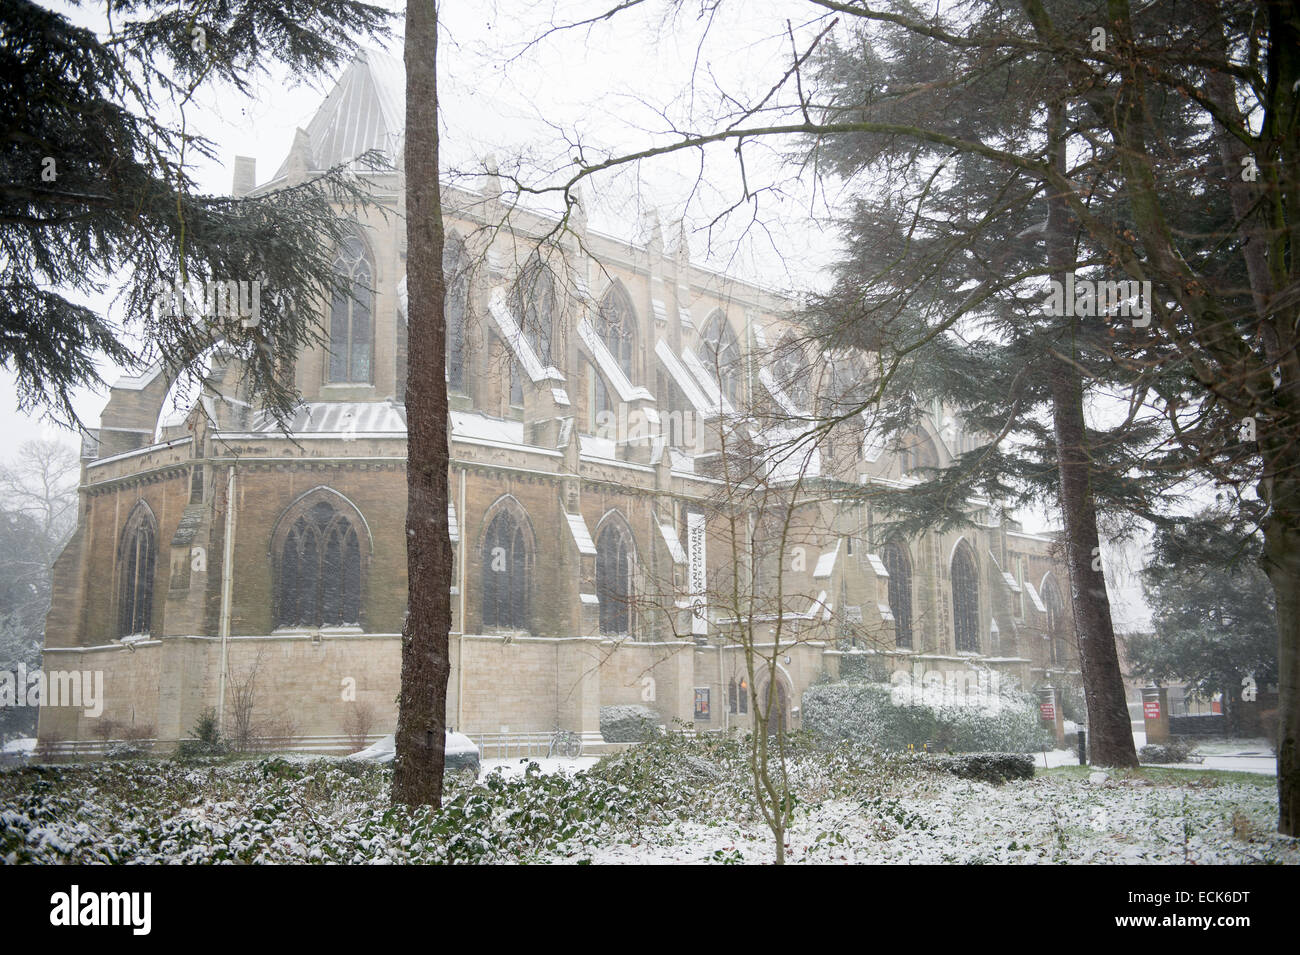 Grandiose Victorian church, long deconsecrated and reopened as Teddington Landmark Arts Centre, seen on a snowy day. Stock Photo